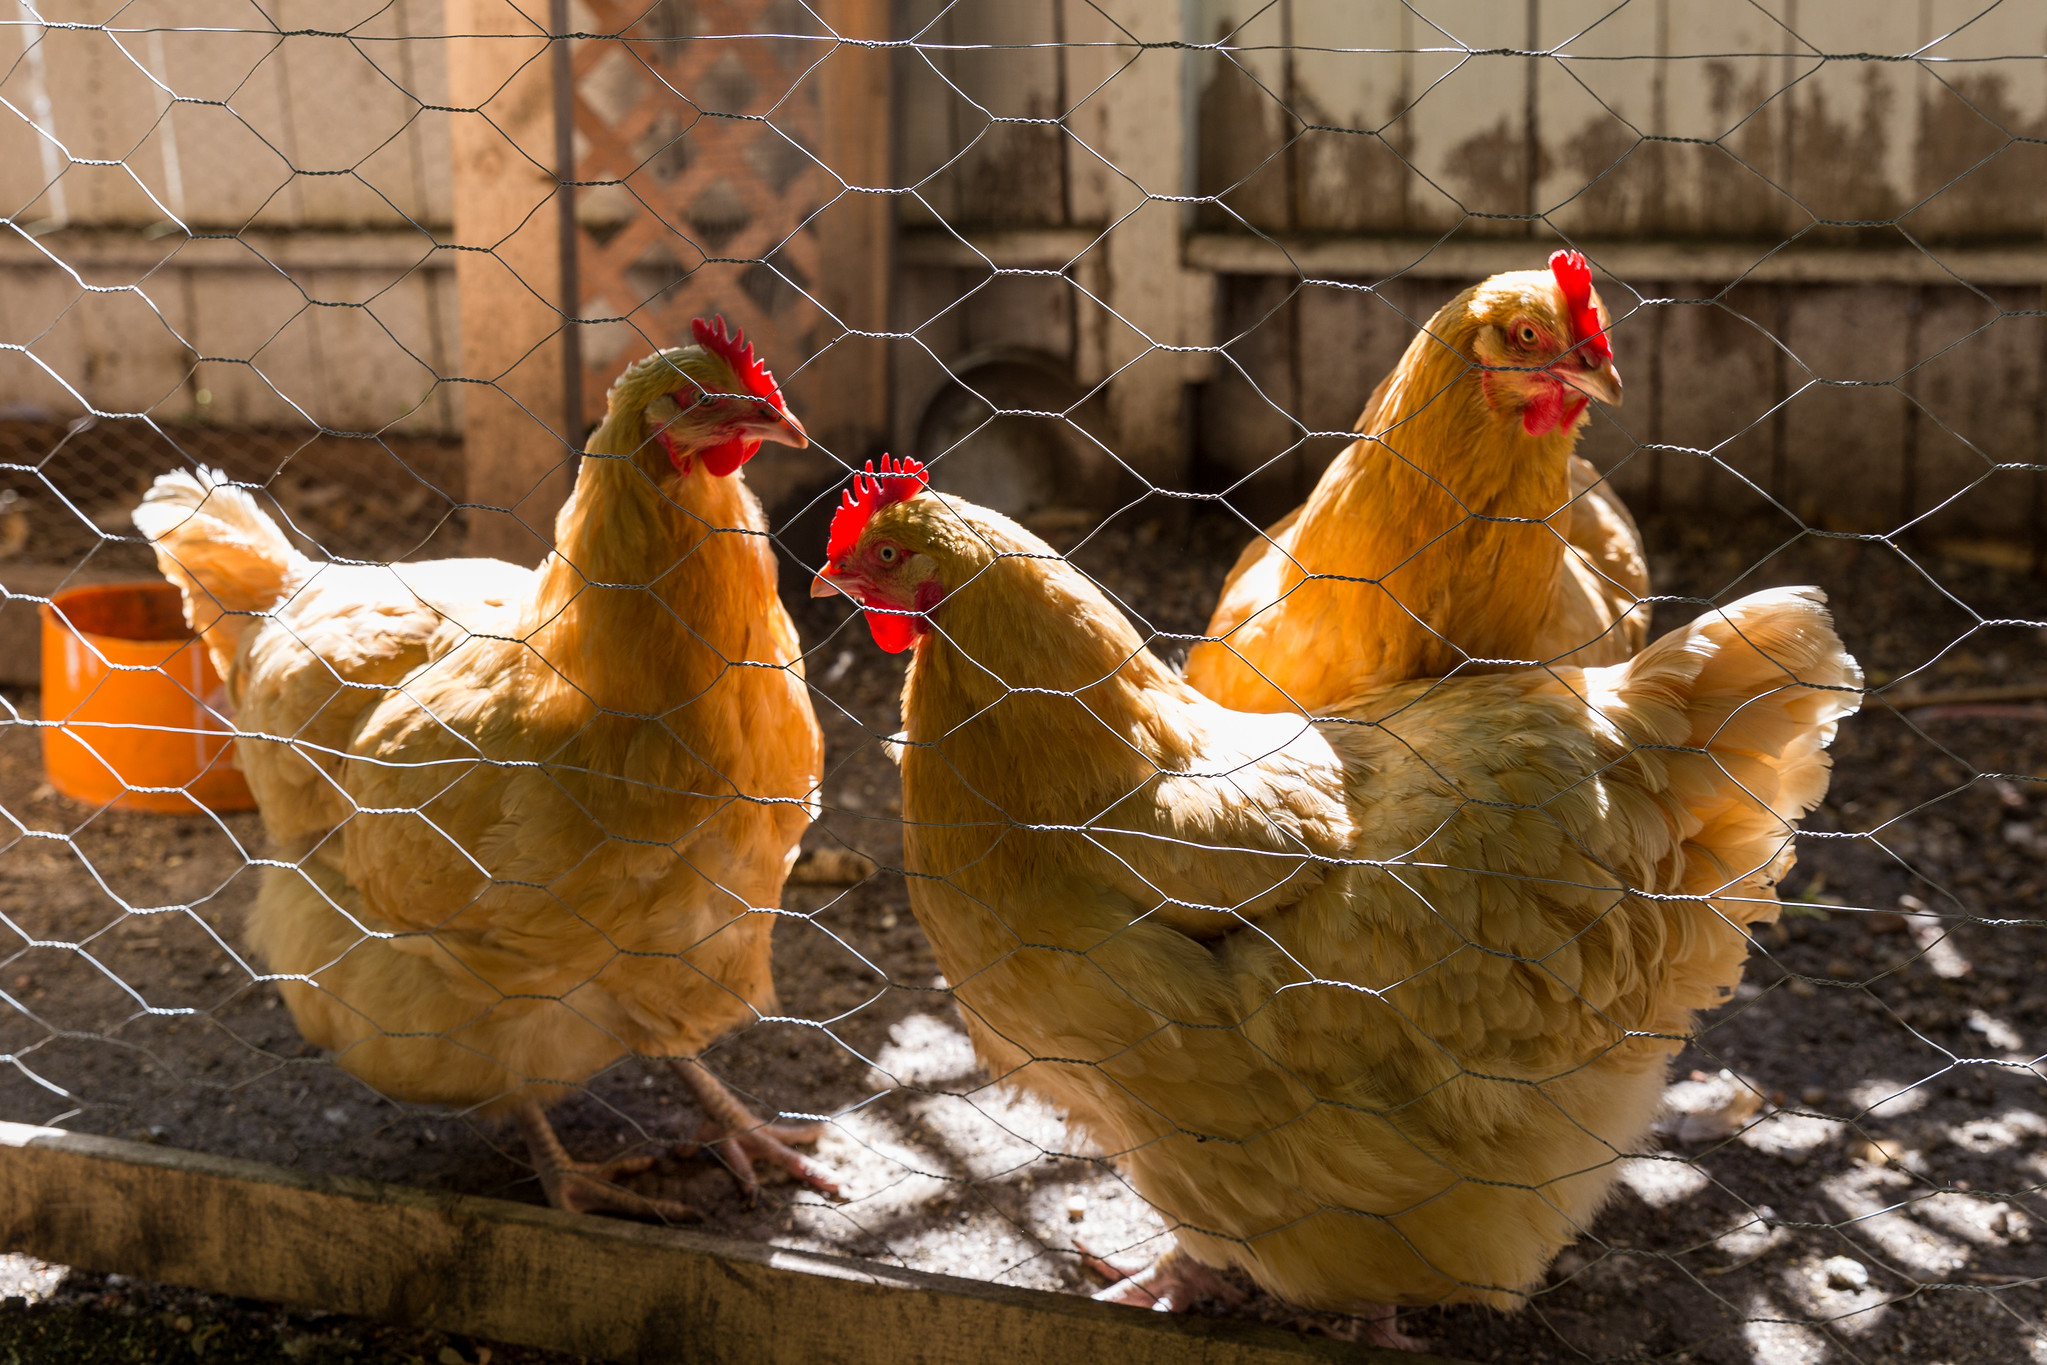 Want backyard chickens? Here’s what you need to know.